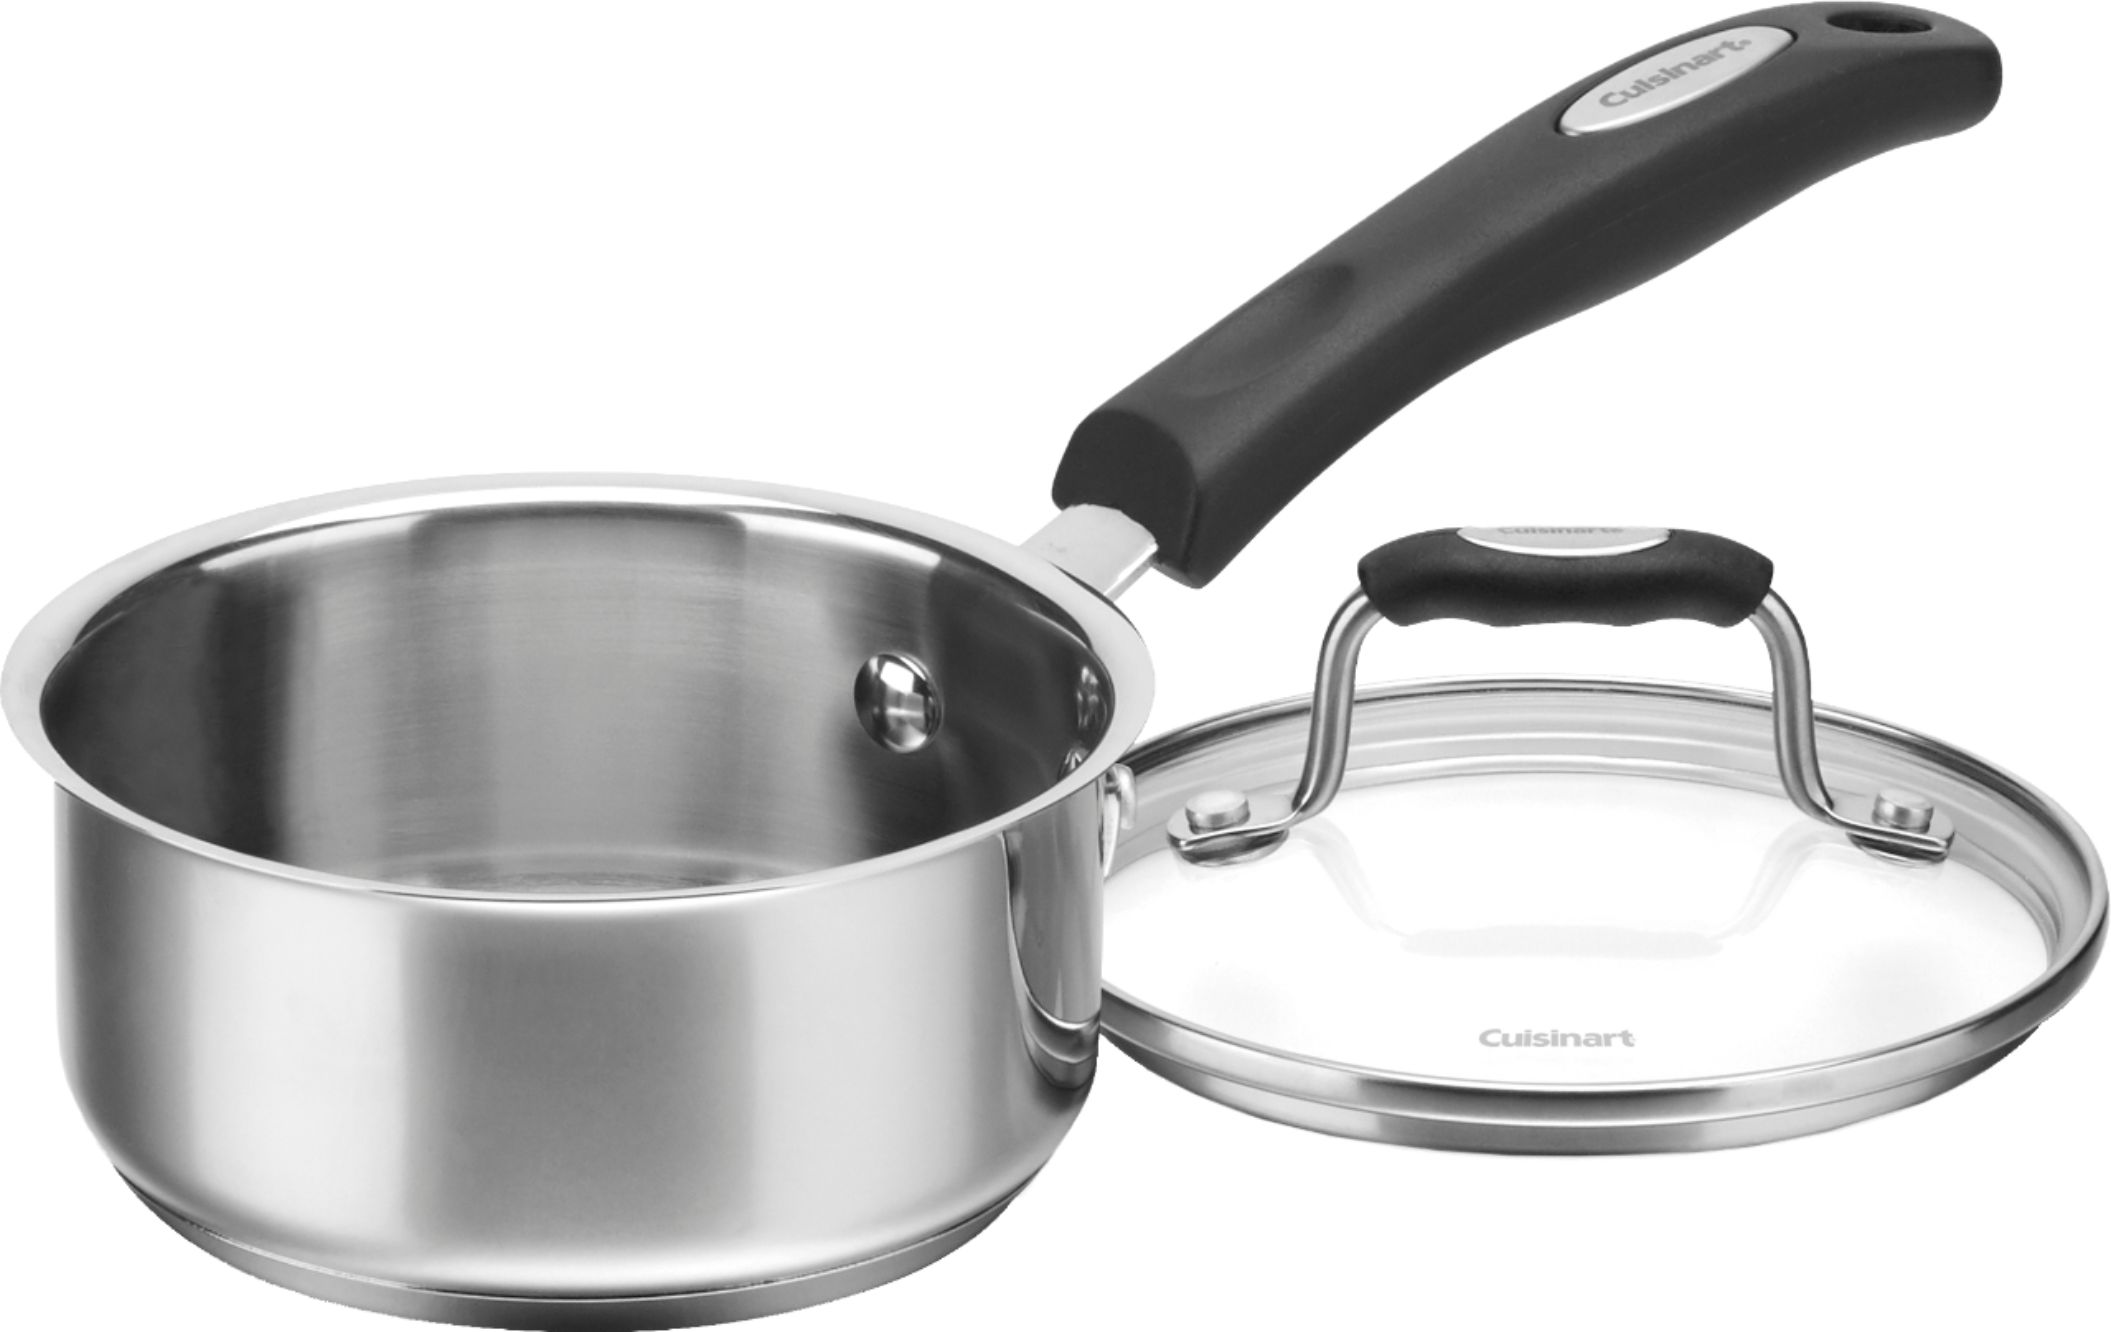 Cuisinart Professional Stainless Skillet, 10-Inch — Luxio